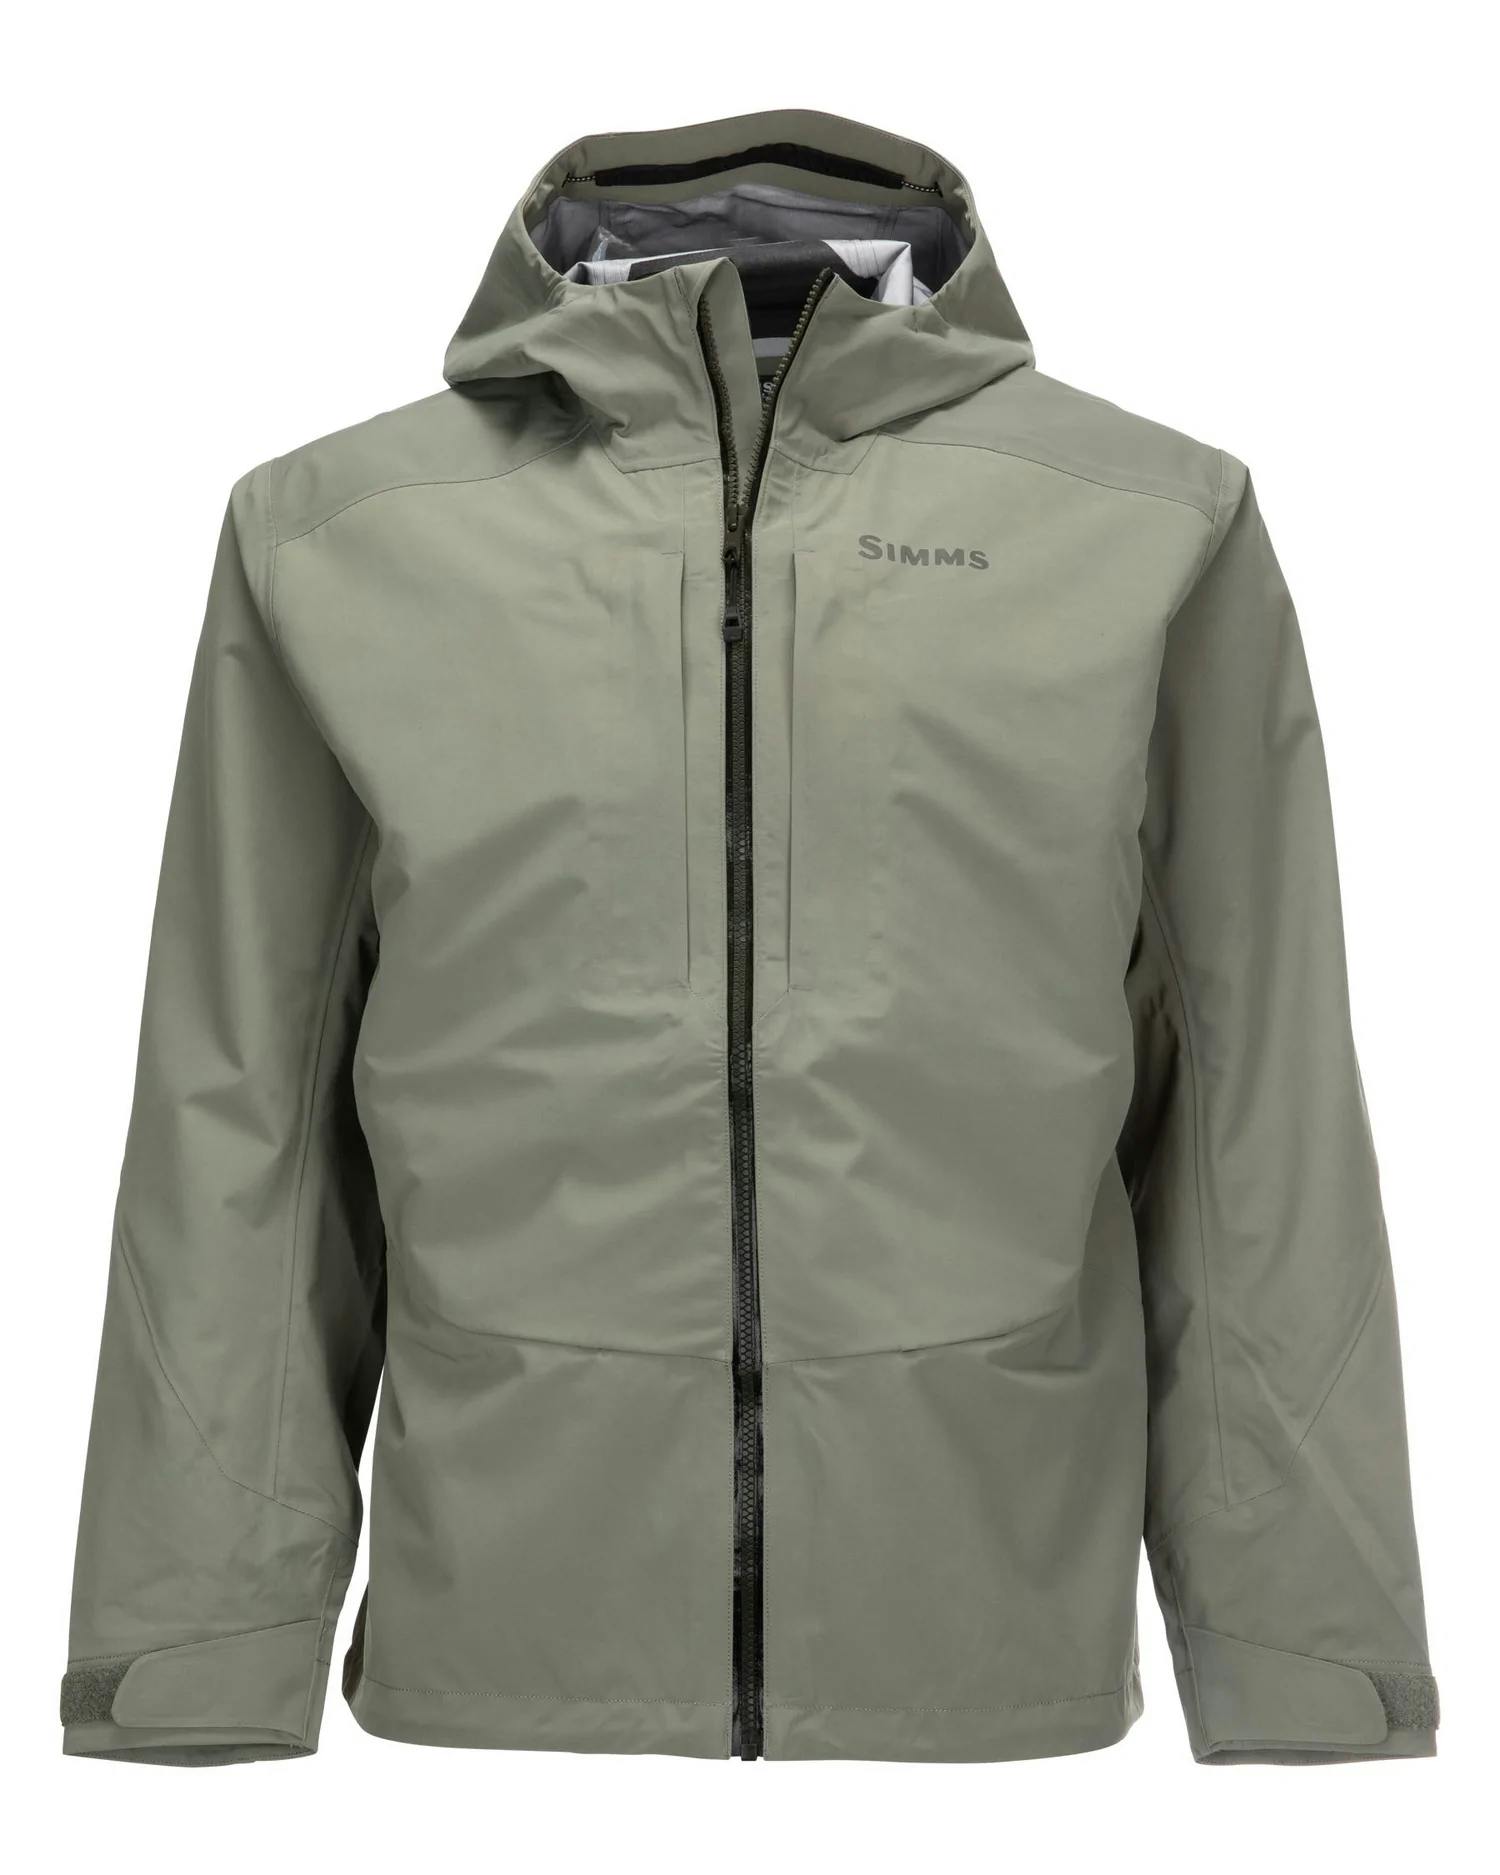 The 6 Most Recommended Fly Fishing Jackets